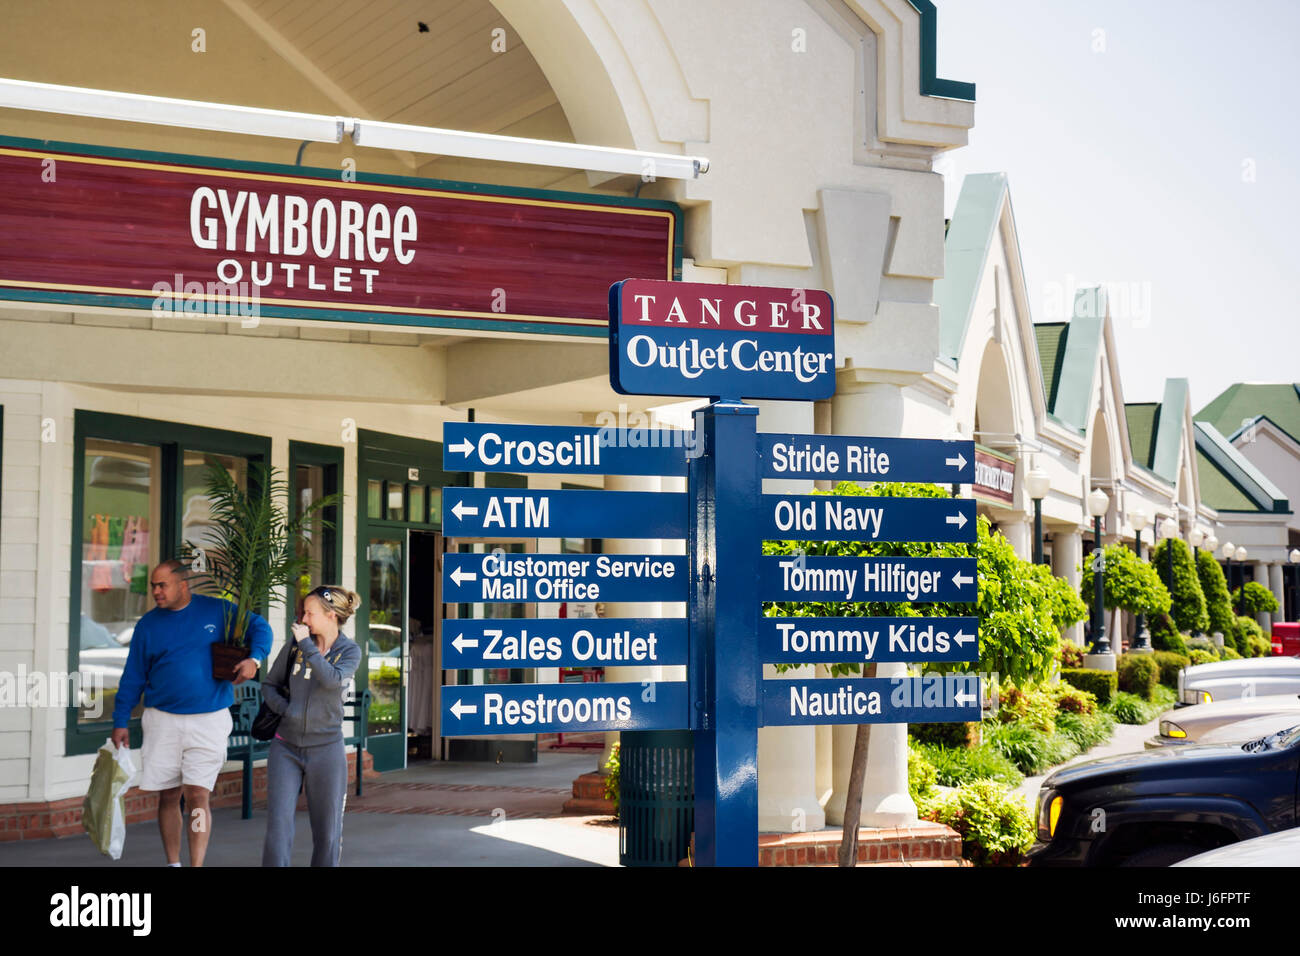 Sevierville Tennessee, Smoky Mountains, Tanger Outlets in Five Oaks, Shopping Shopper Shopper Shopper Shop Shops Market Buying Selling, Store Stores Business Bus Stockfoto